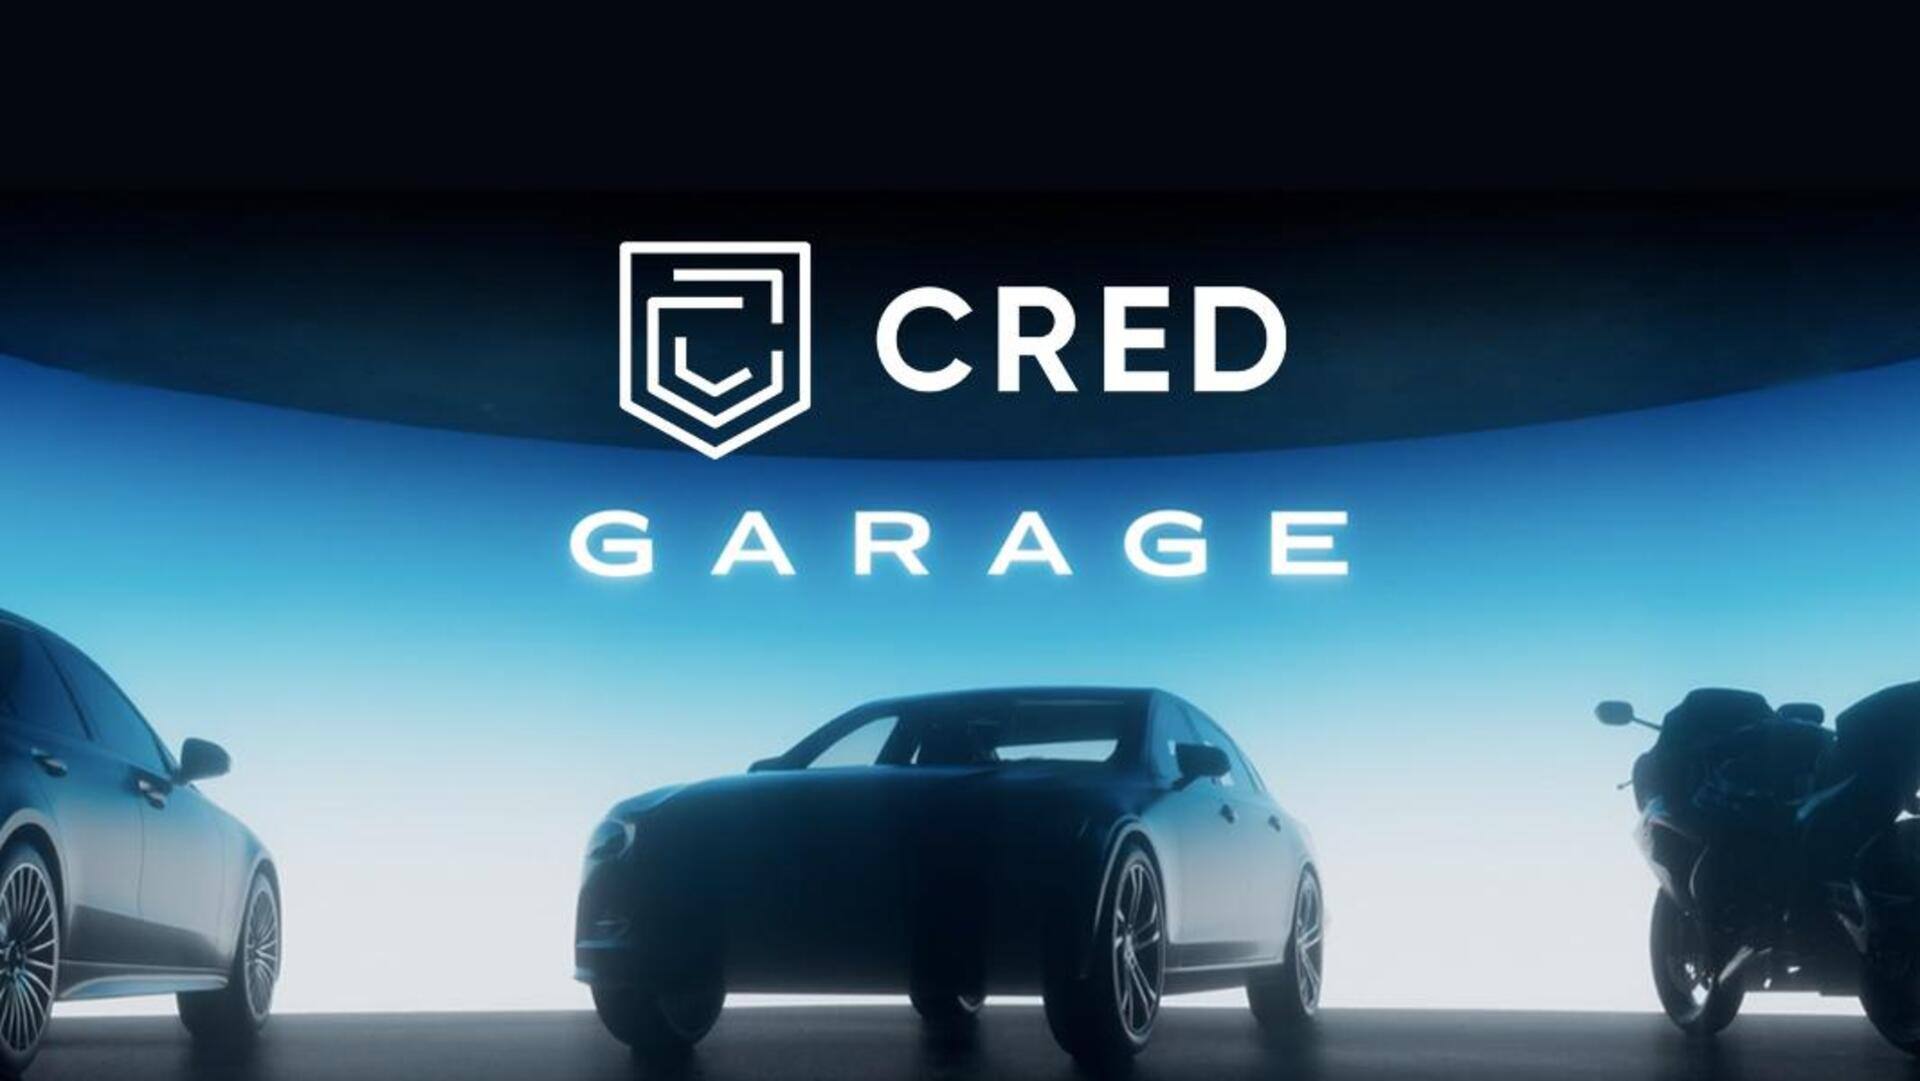 CRED introduces Garage as one-stop vehicle management solution